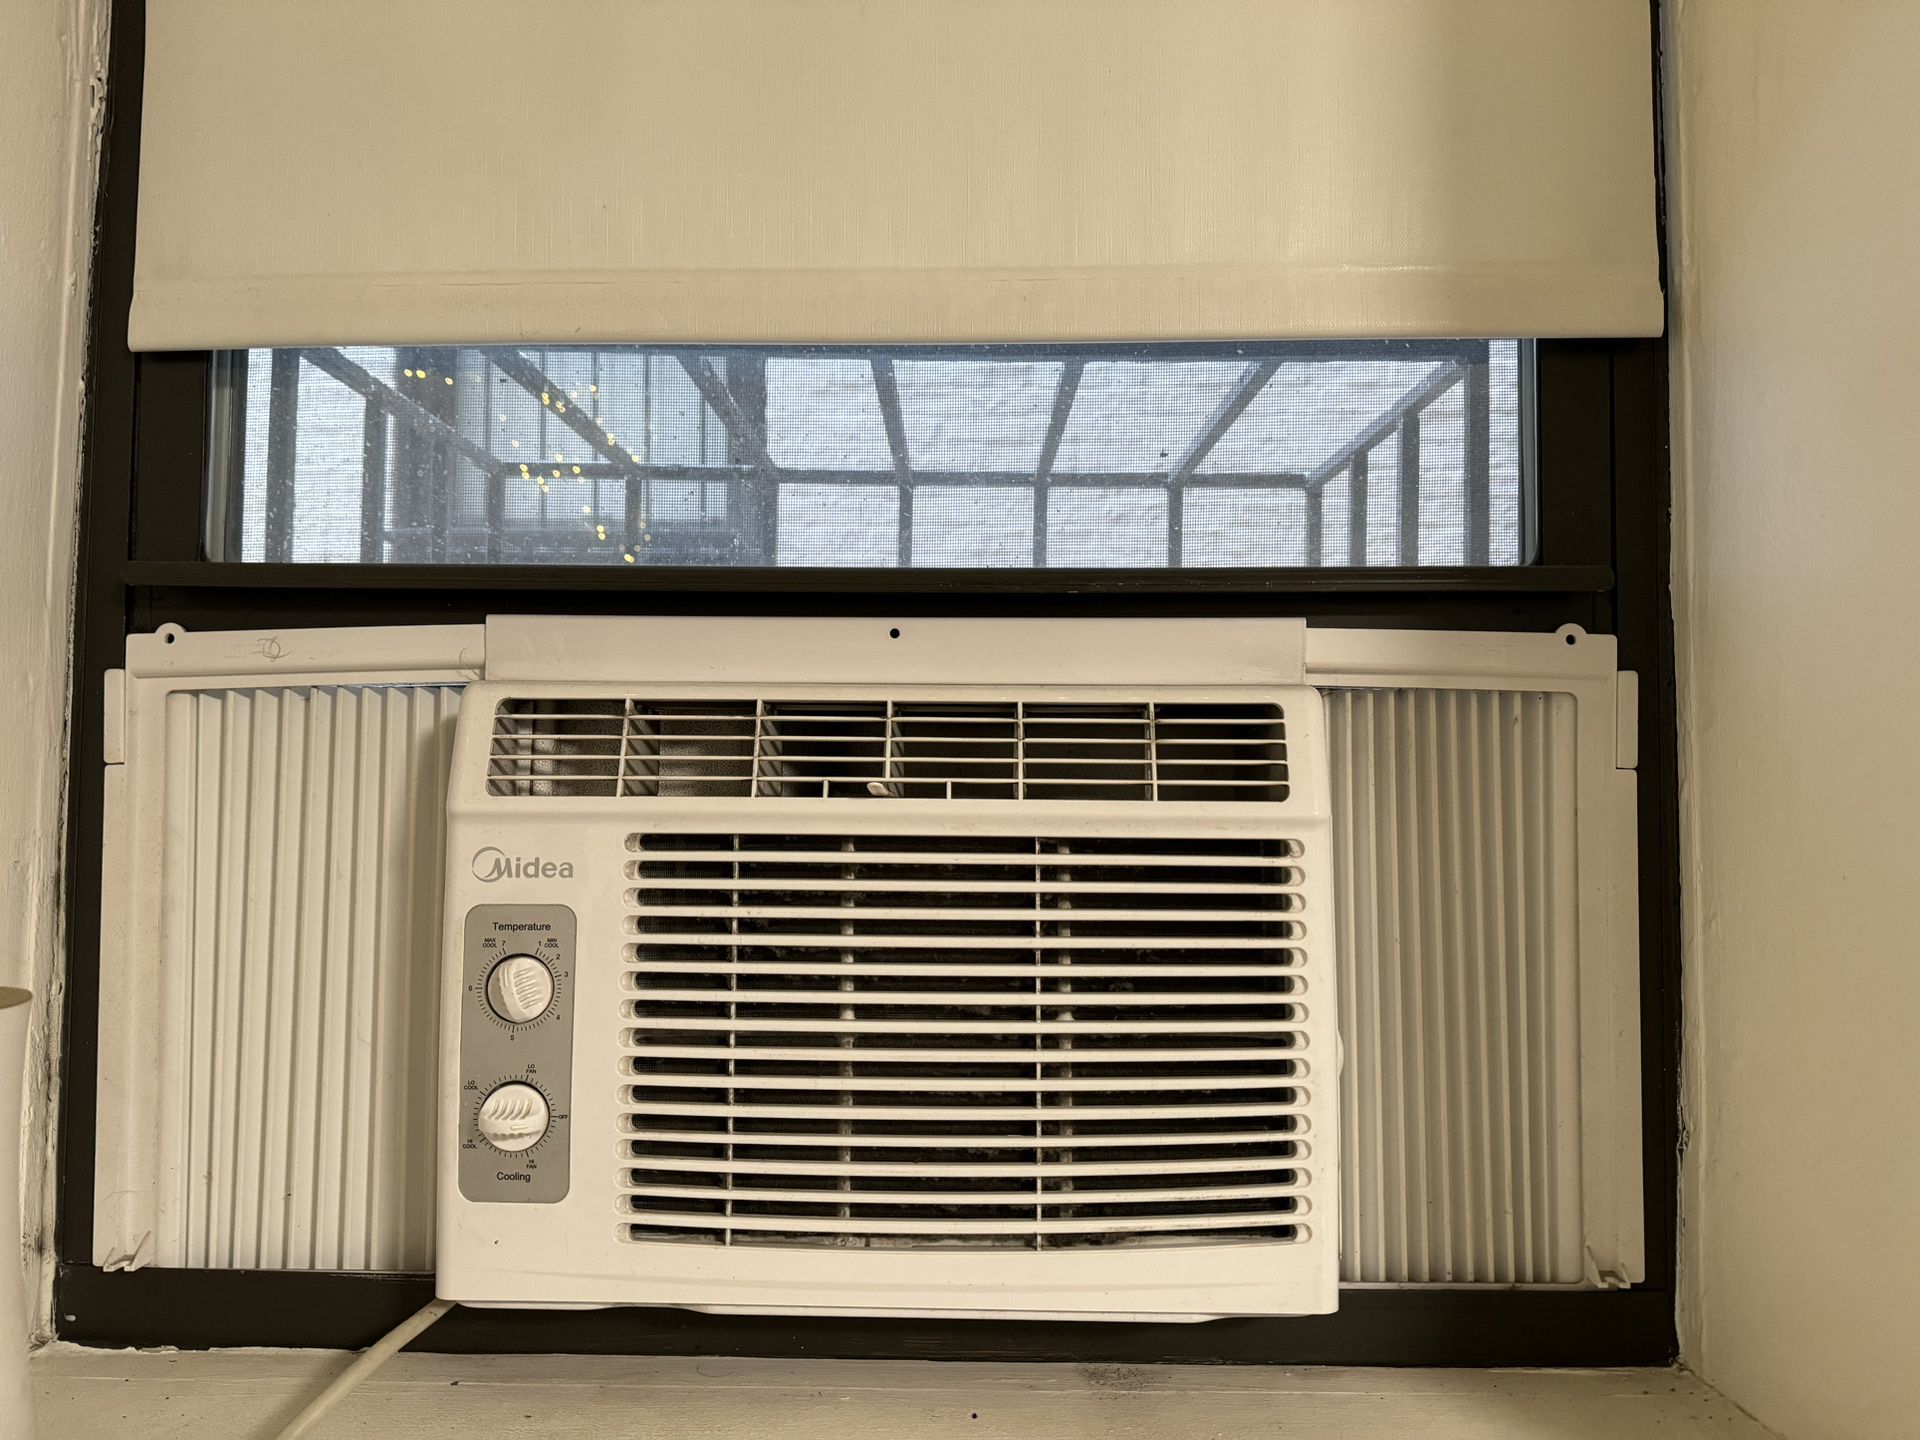 MIDEA 5,000 BTU EasyCool Window Air Conditioner and Fan-Cools Up to